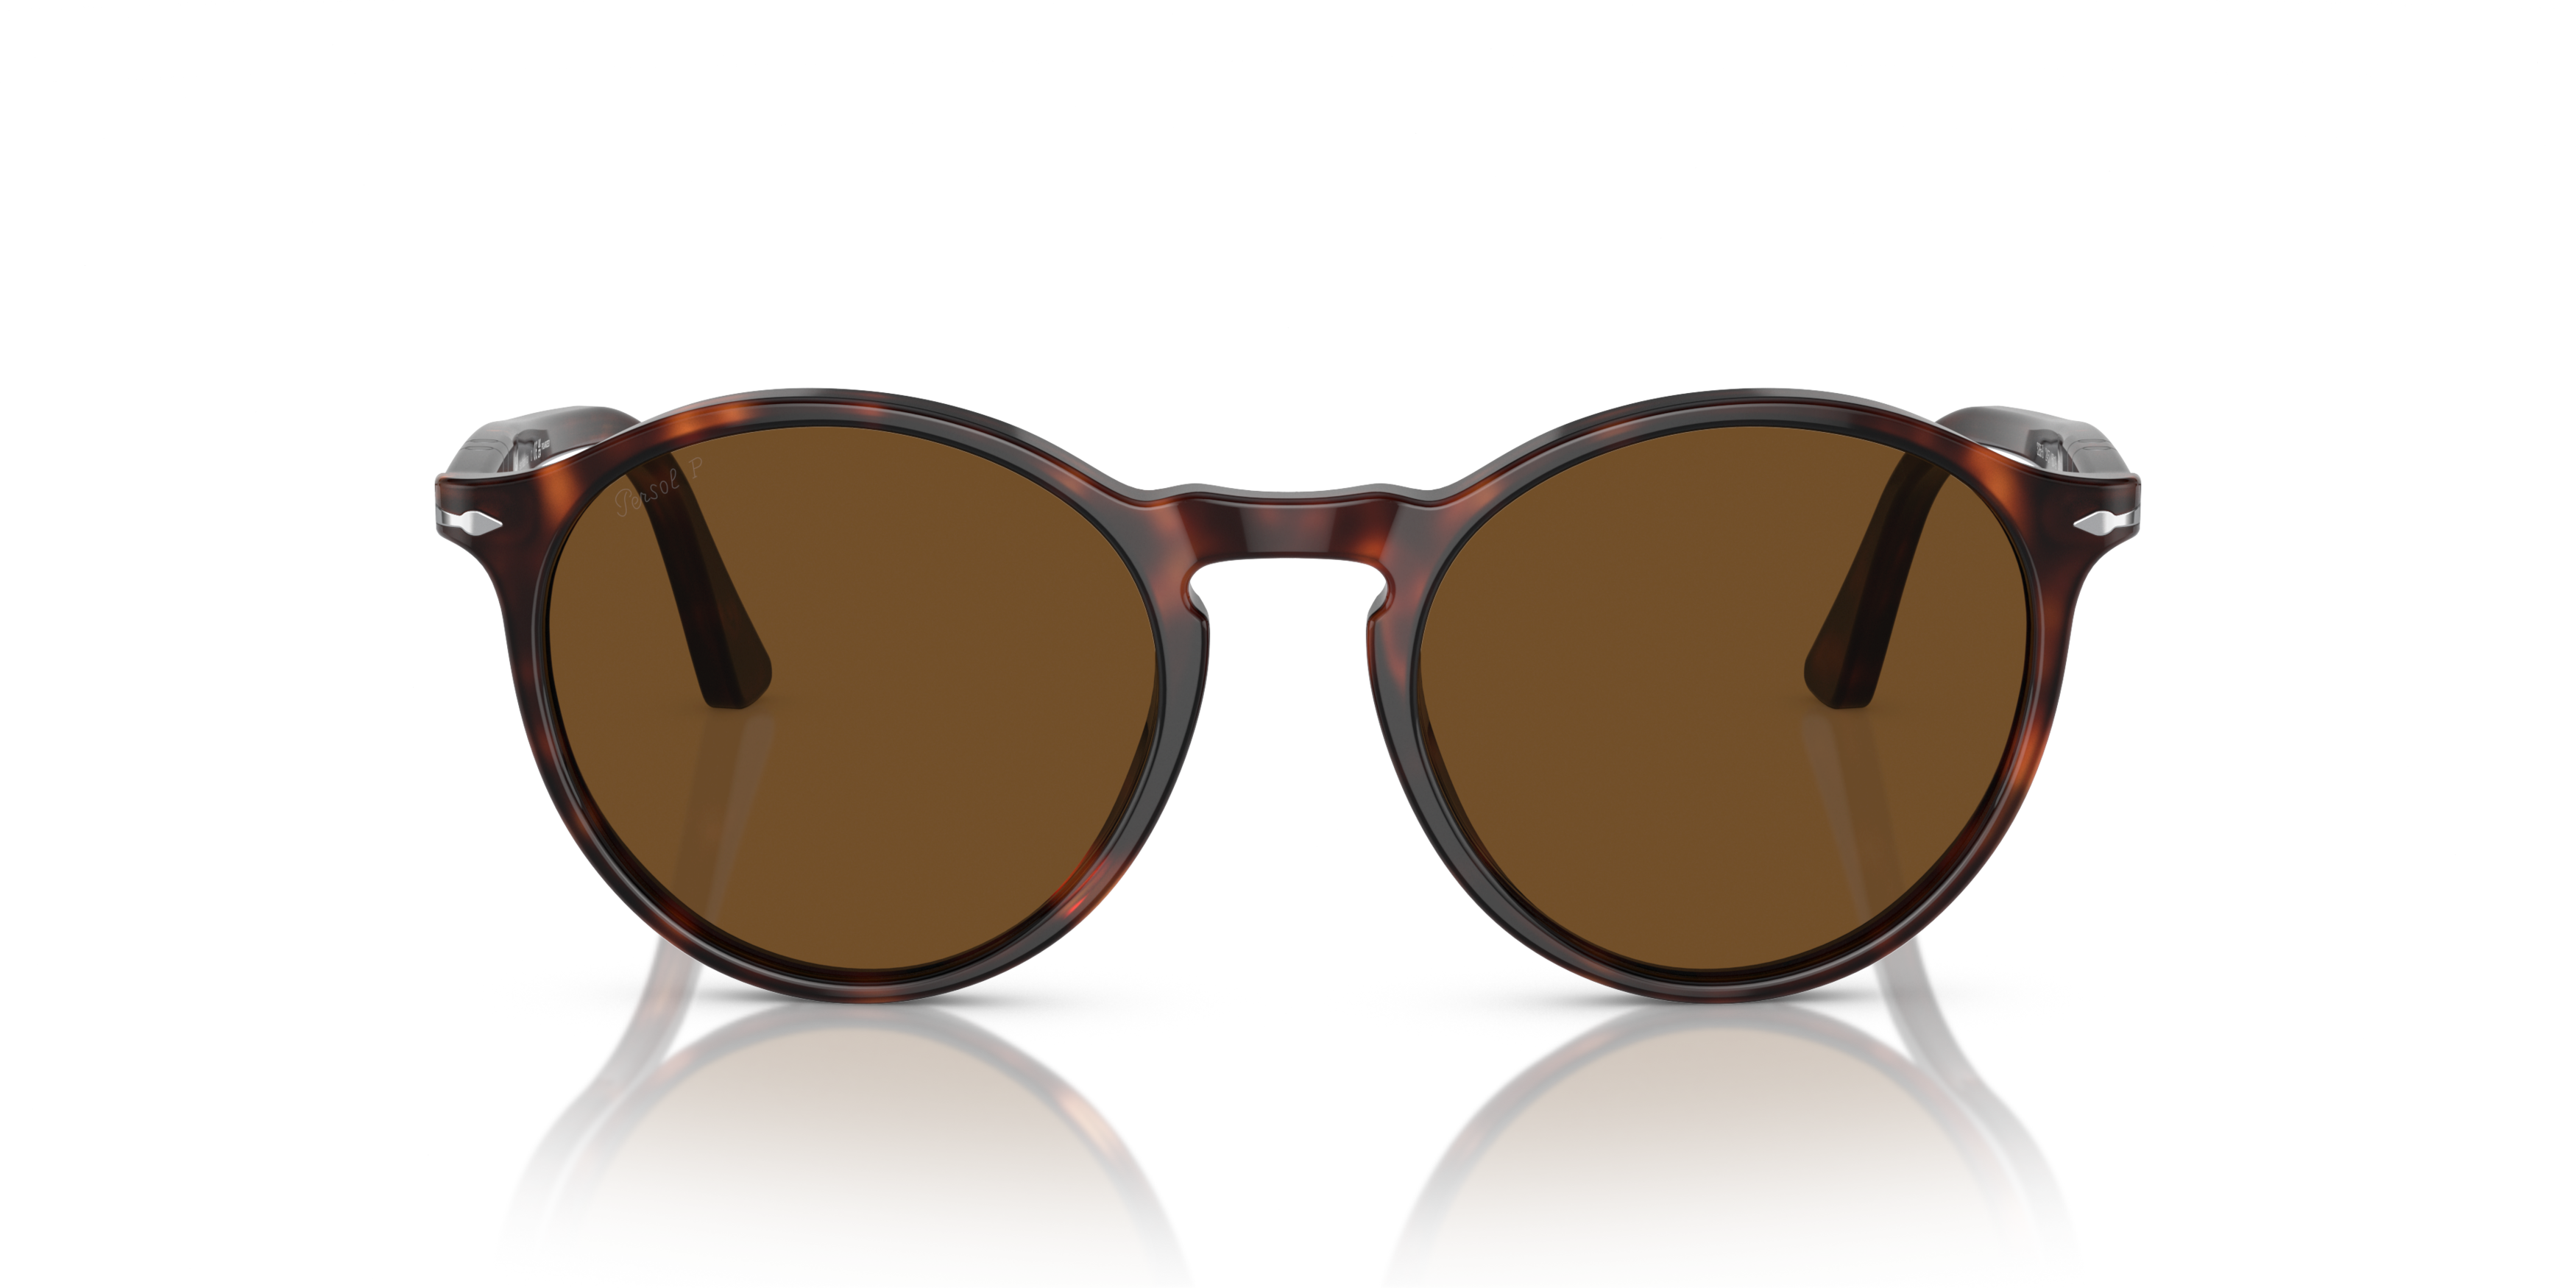 [products.image.front] PERSOL PO3285S 24/57